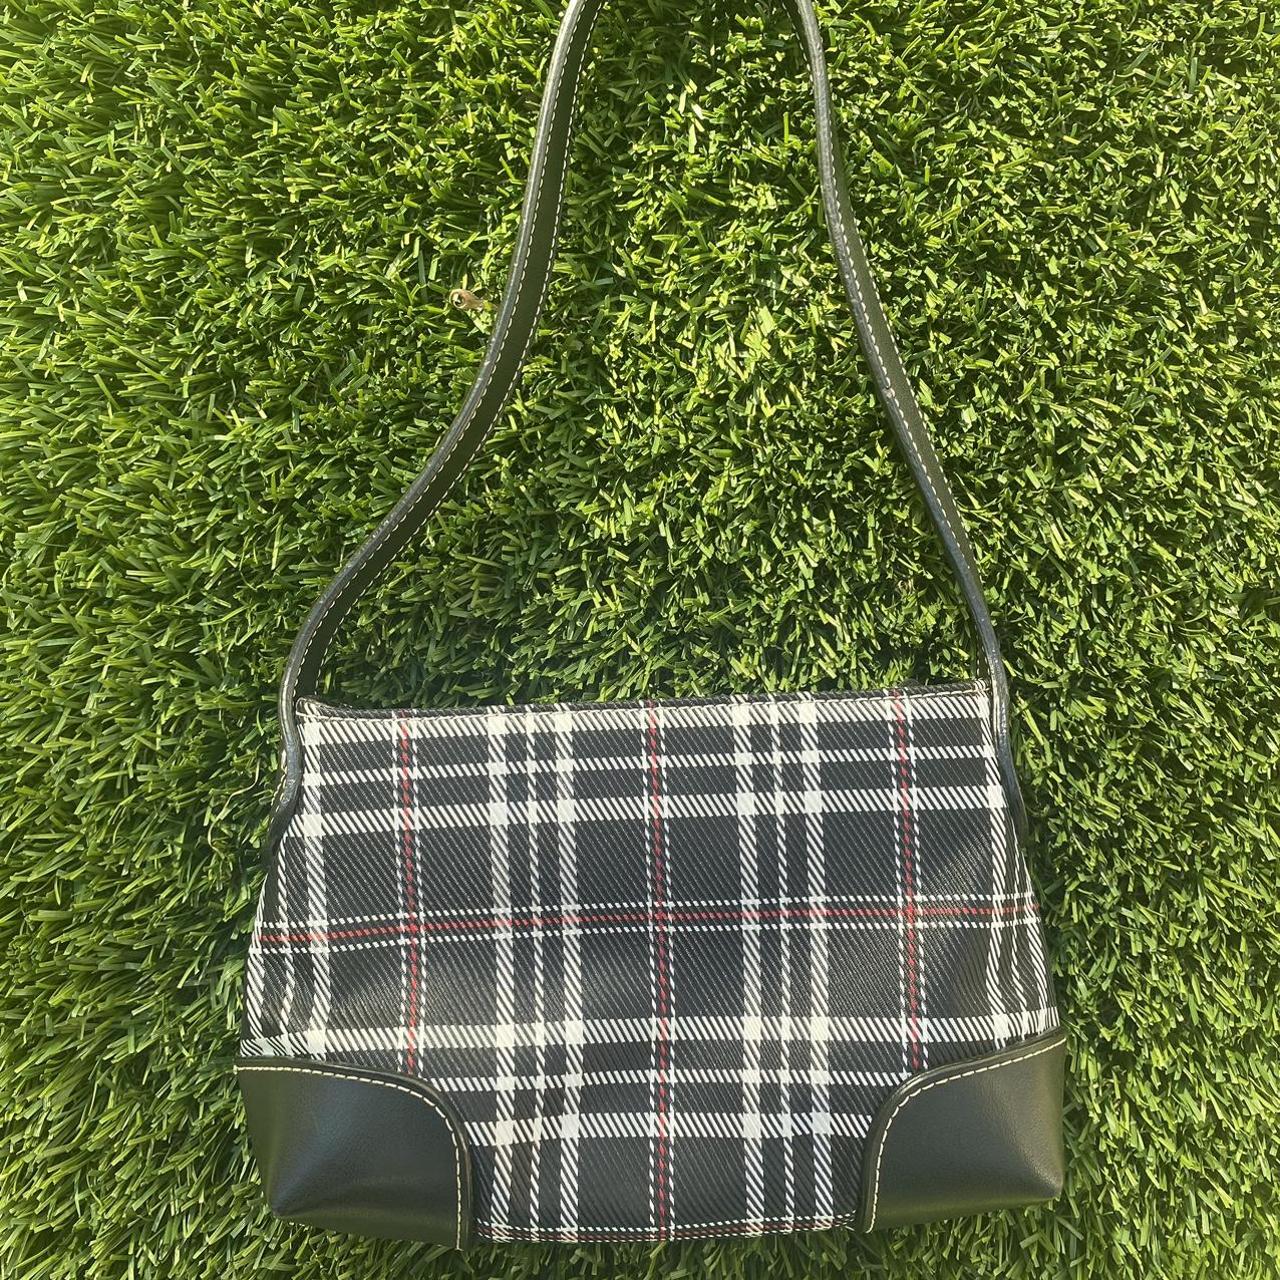 Red & Black Plaid Purse! In very good condition, - Depop